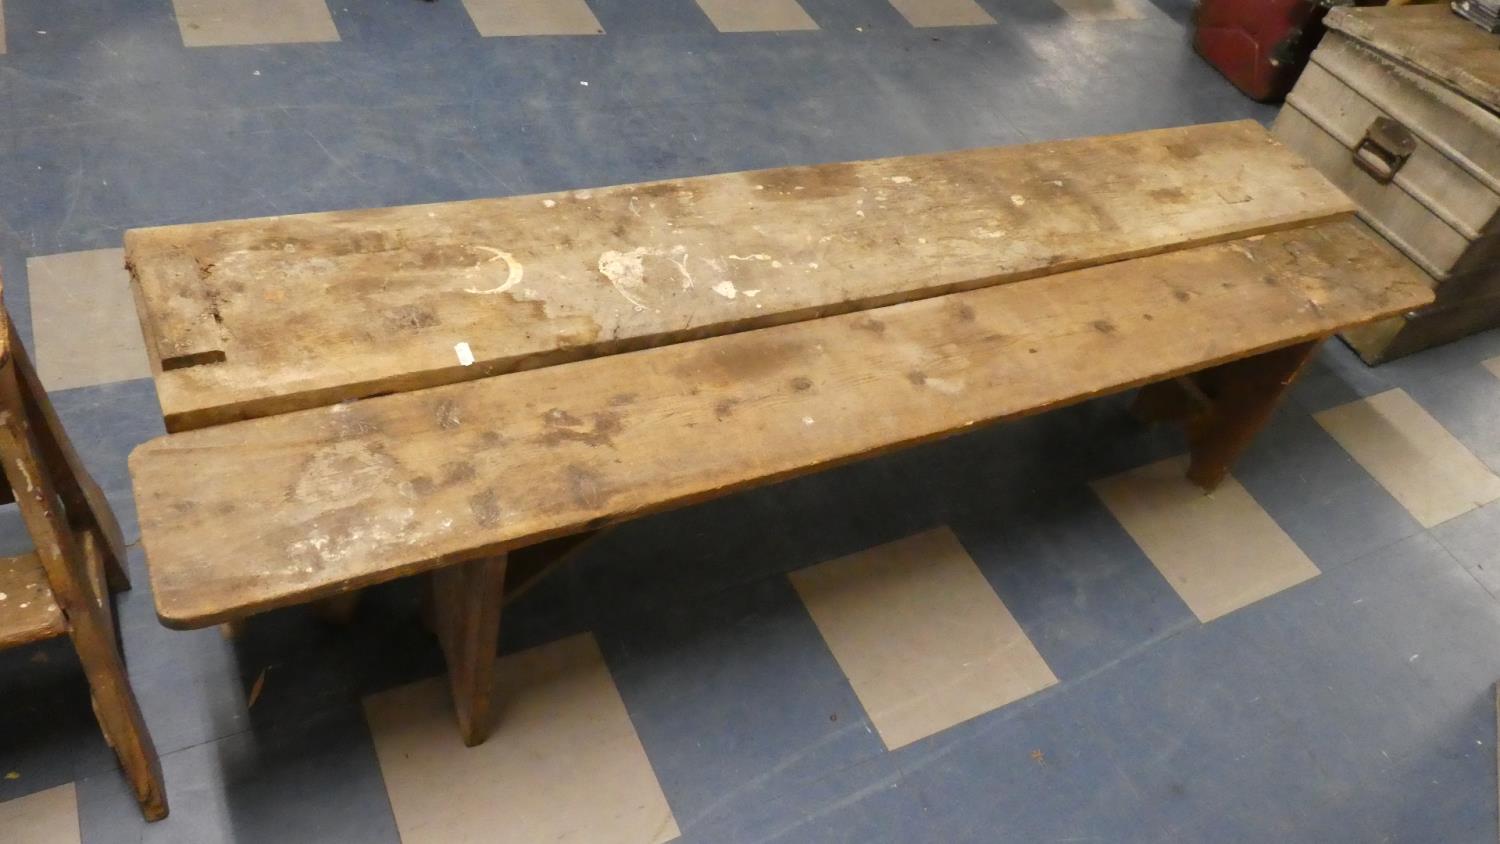 Two Wooden Benches, Each 185cm Long